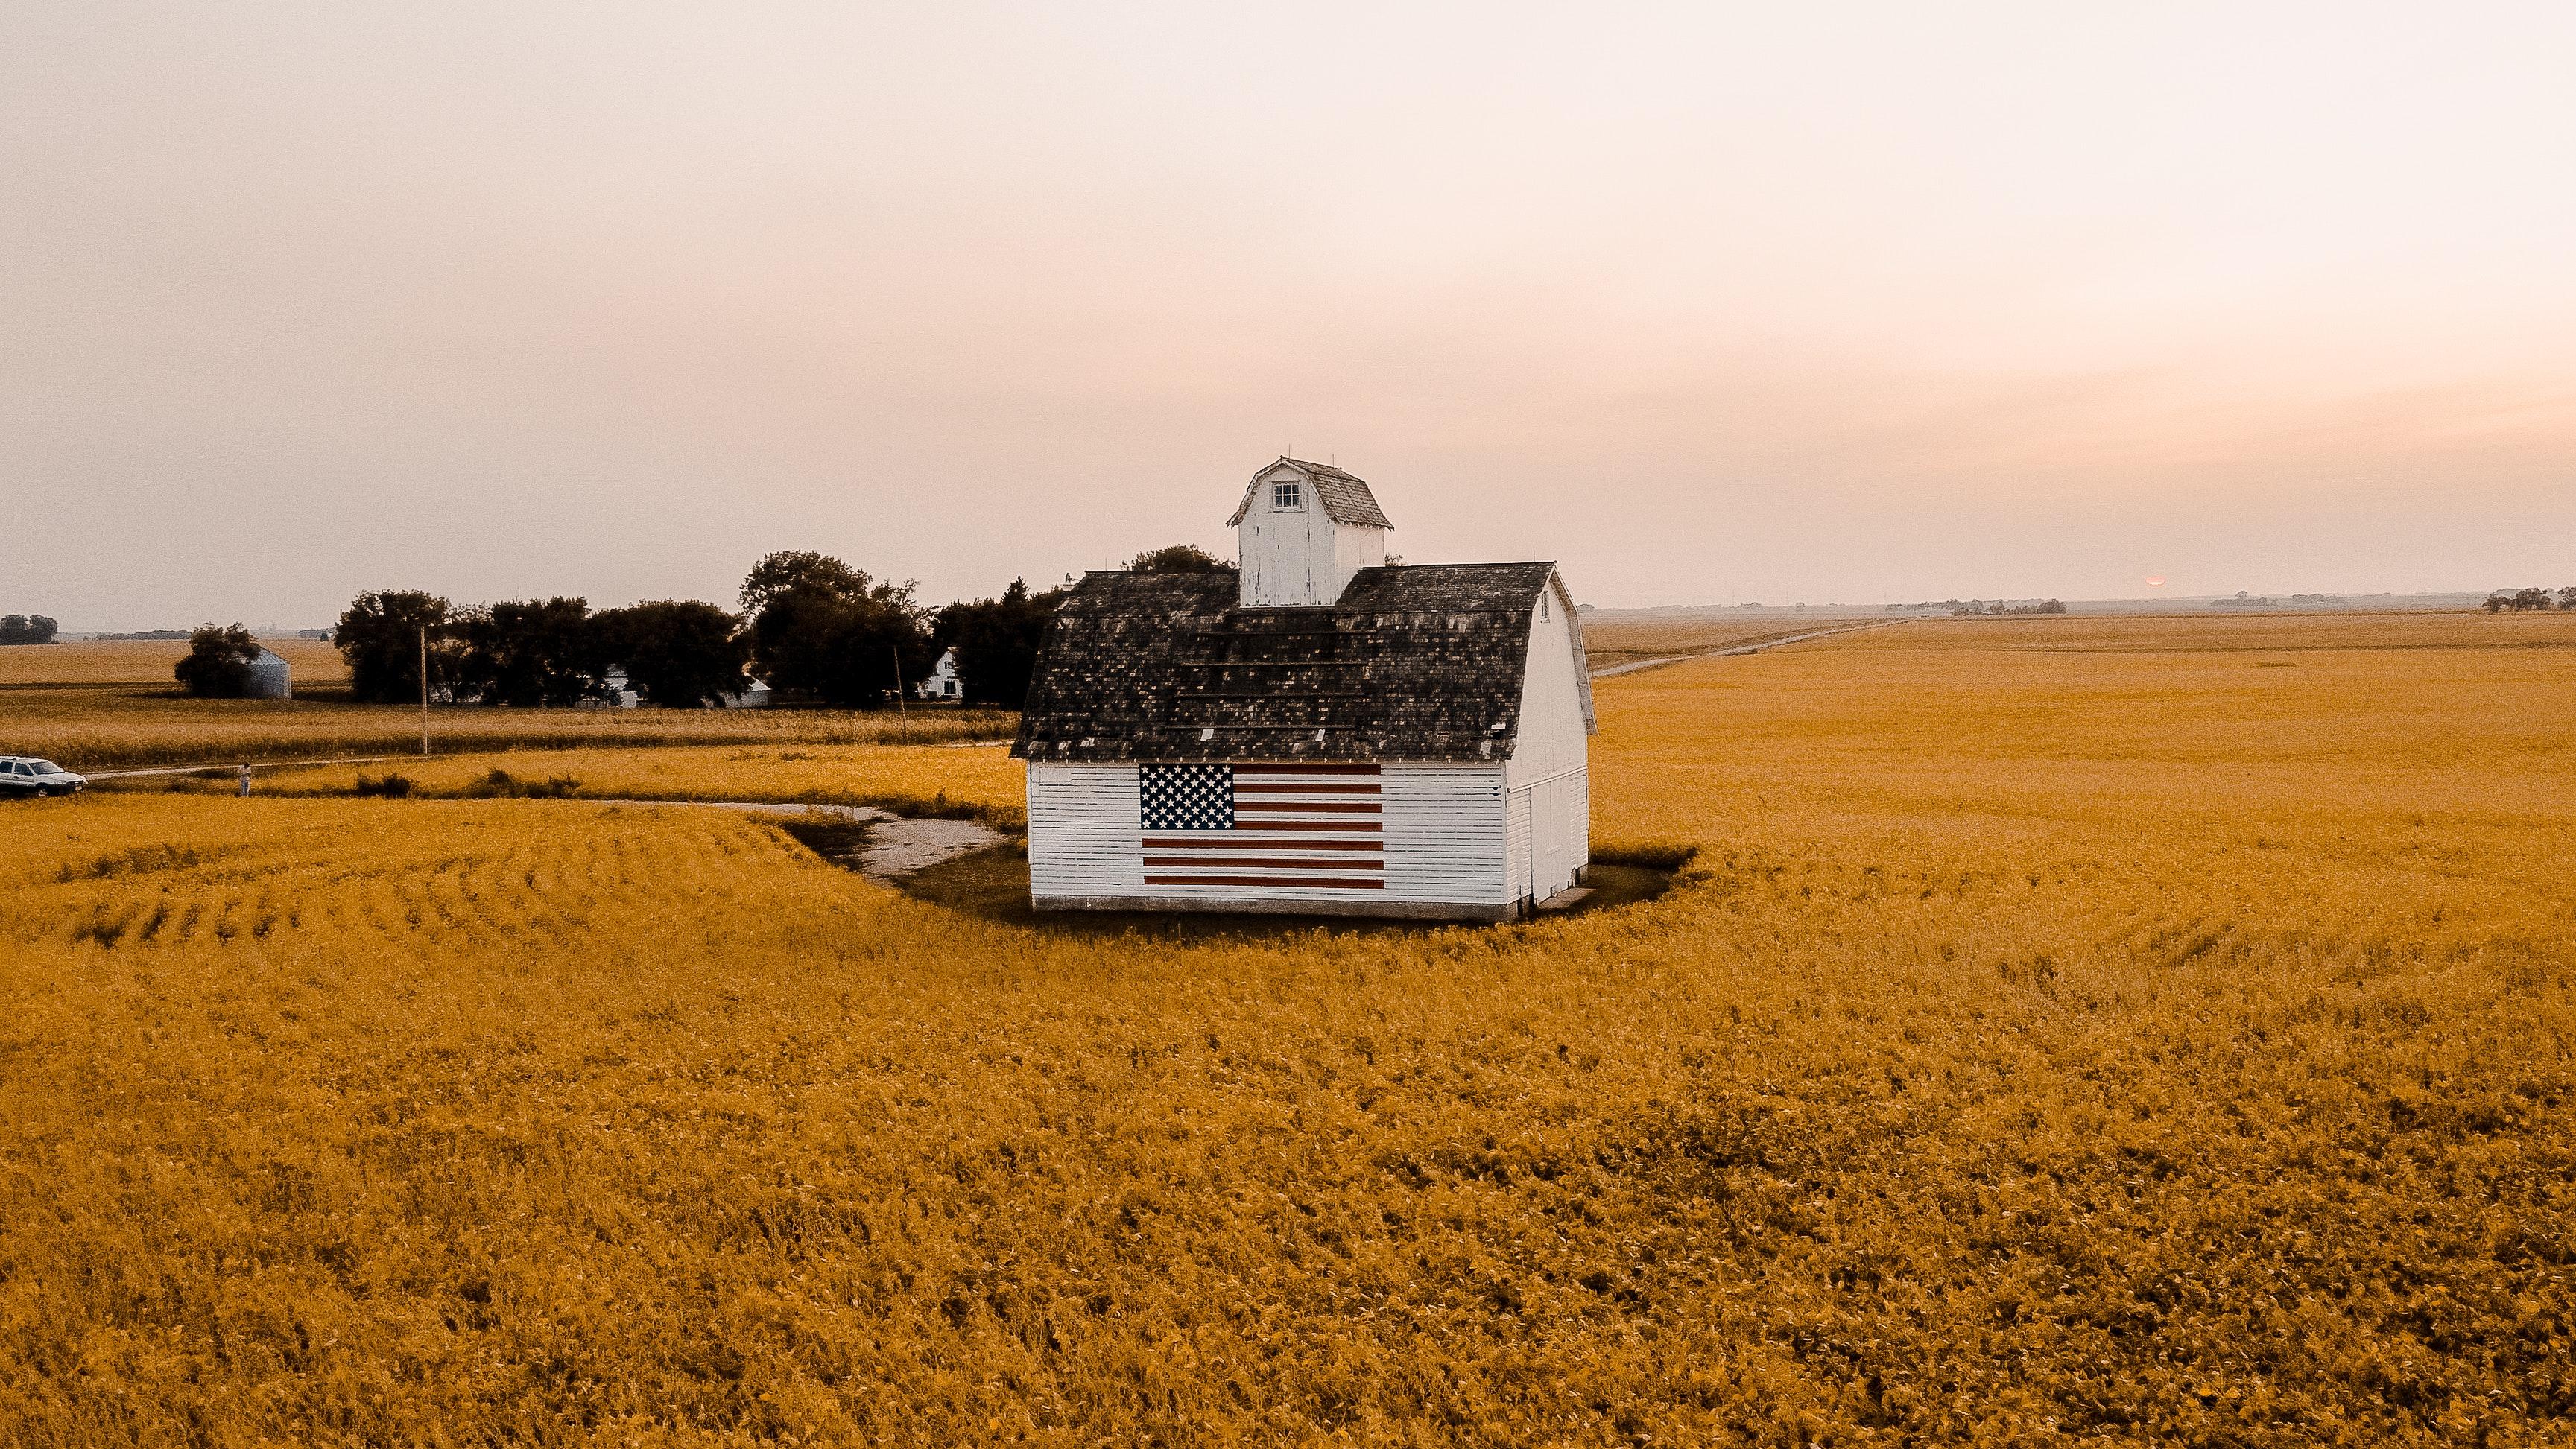 Where are there good agricultural areas in the United States? 